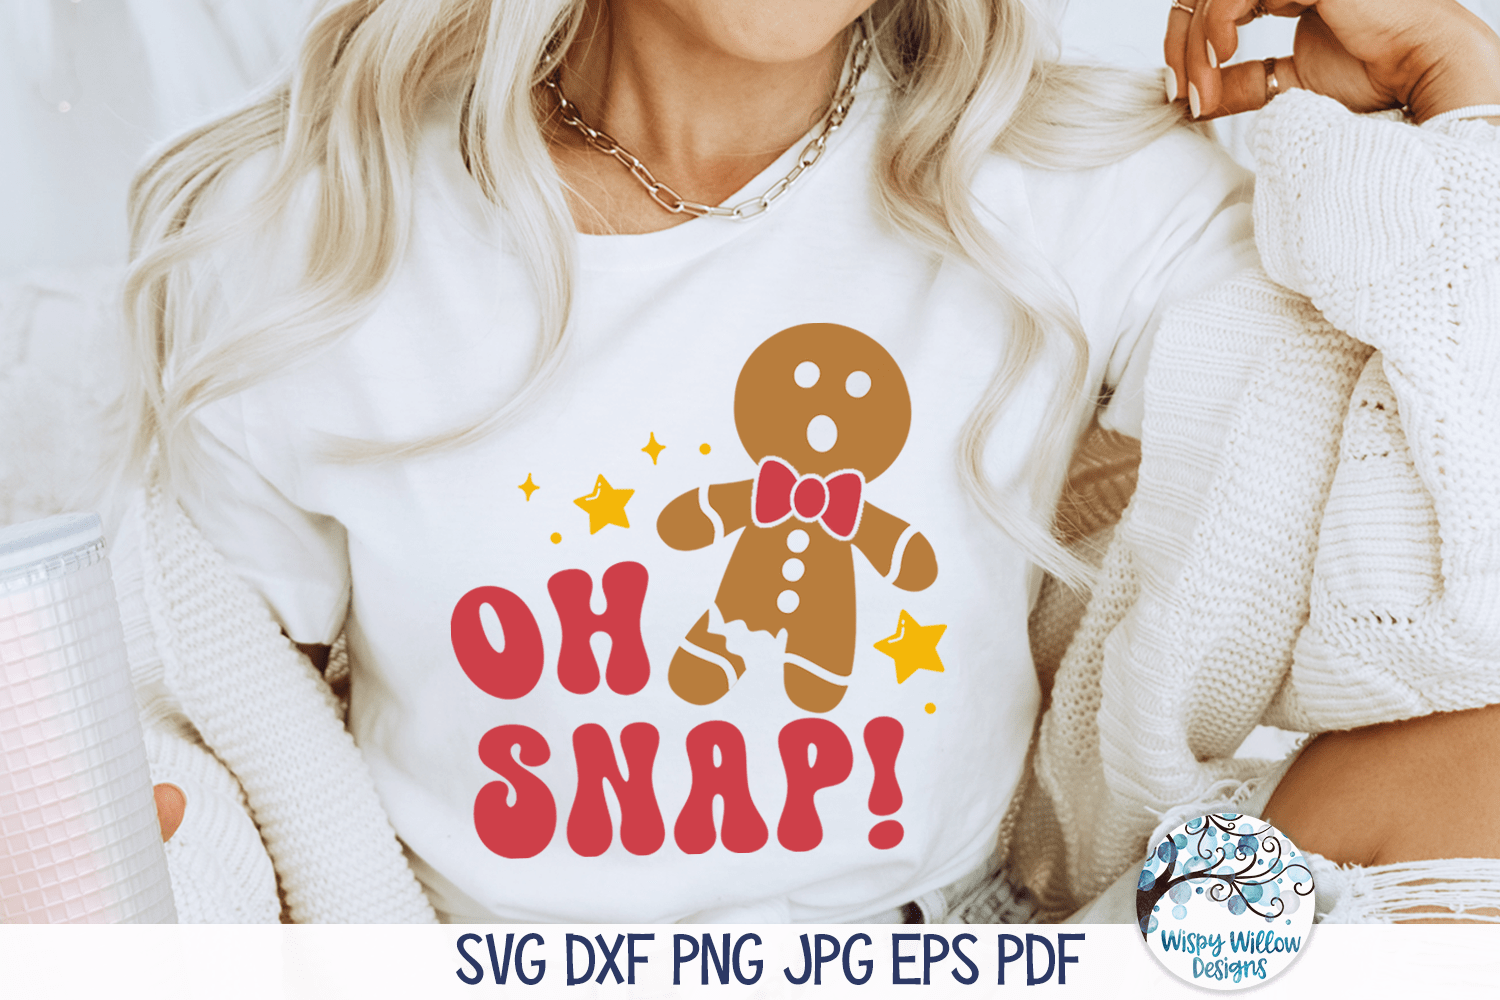 Oh Snap SVG | Funny Gingerbread Man Cookie Wispy Willow Designs Company